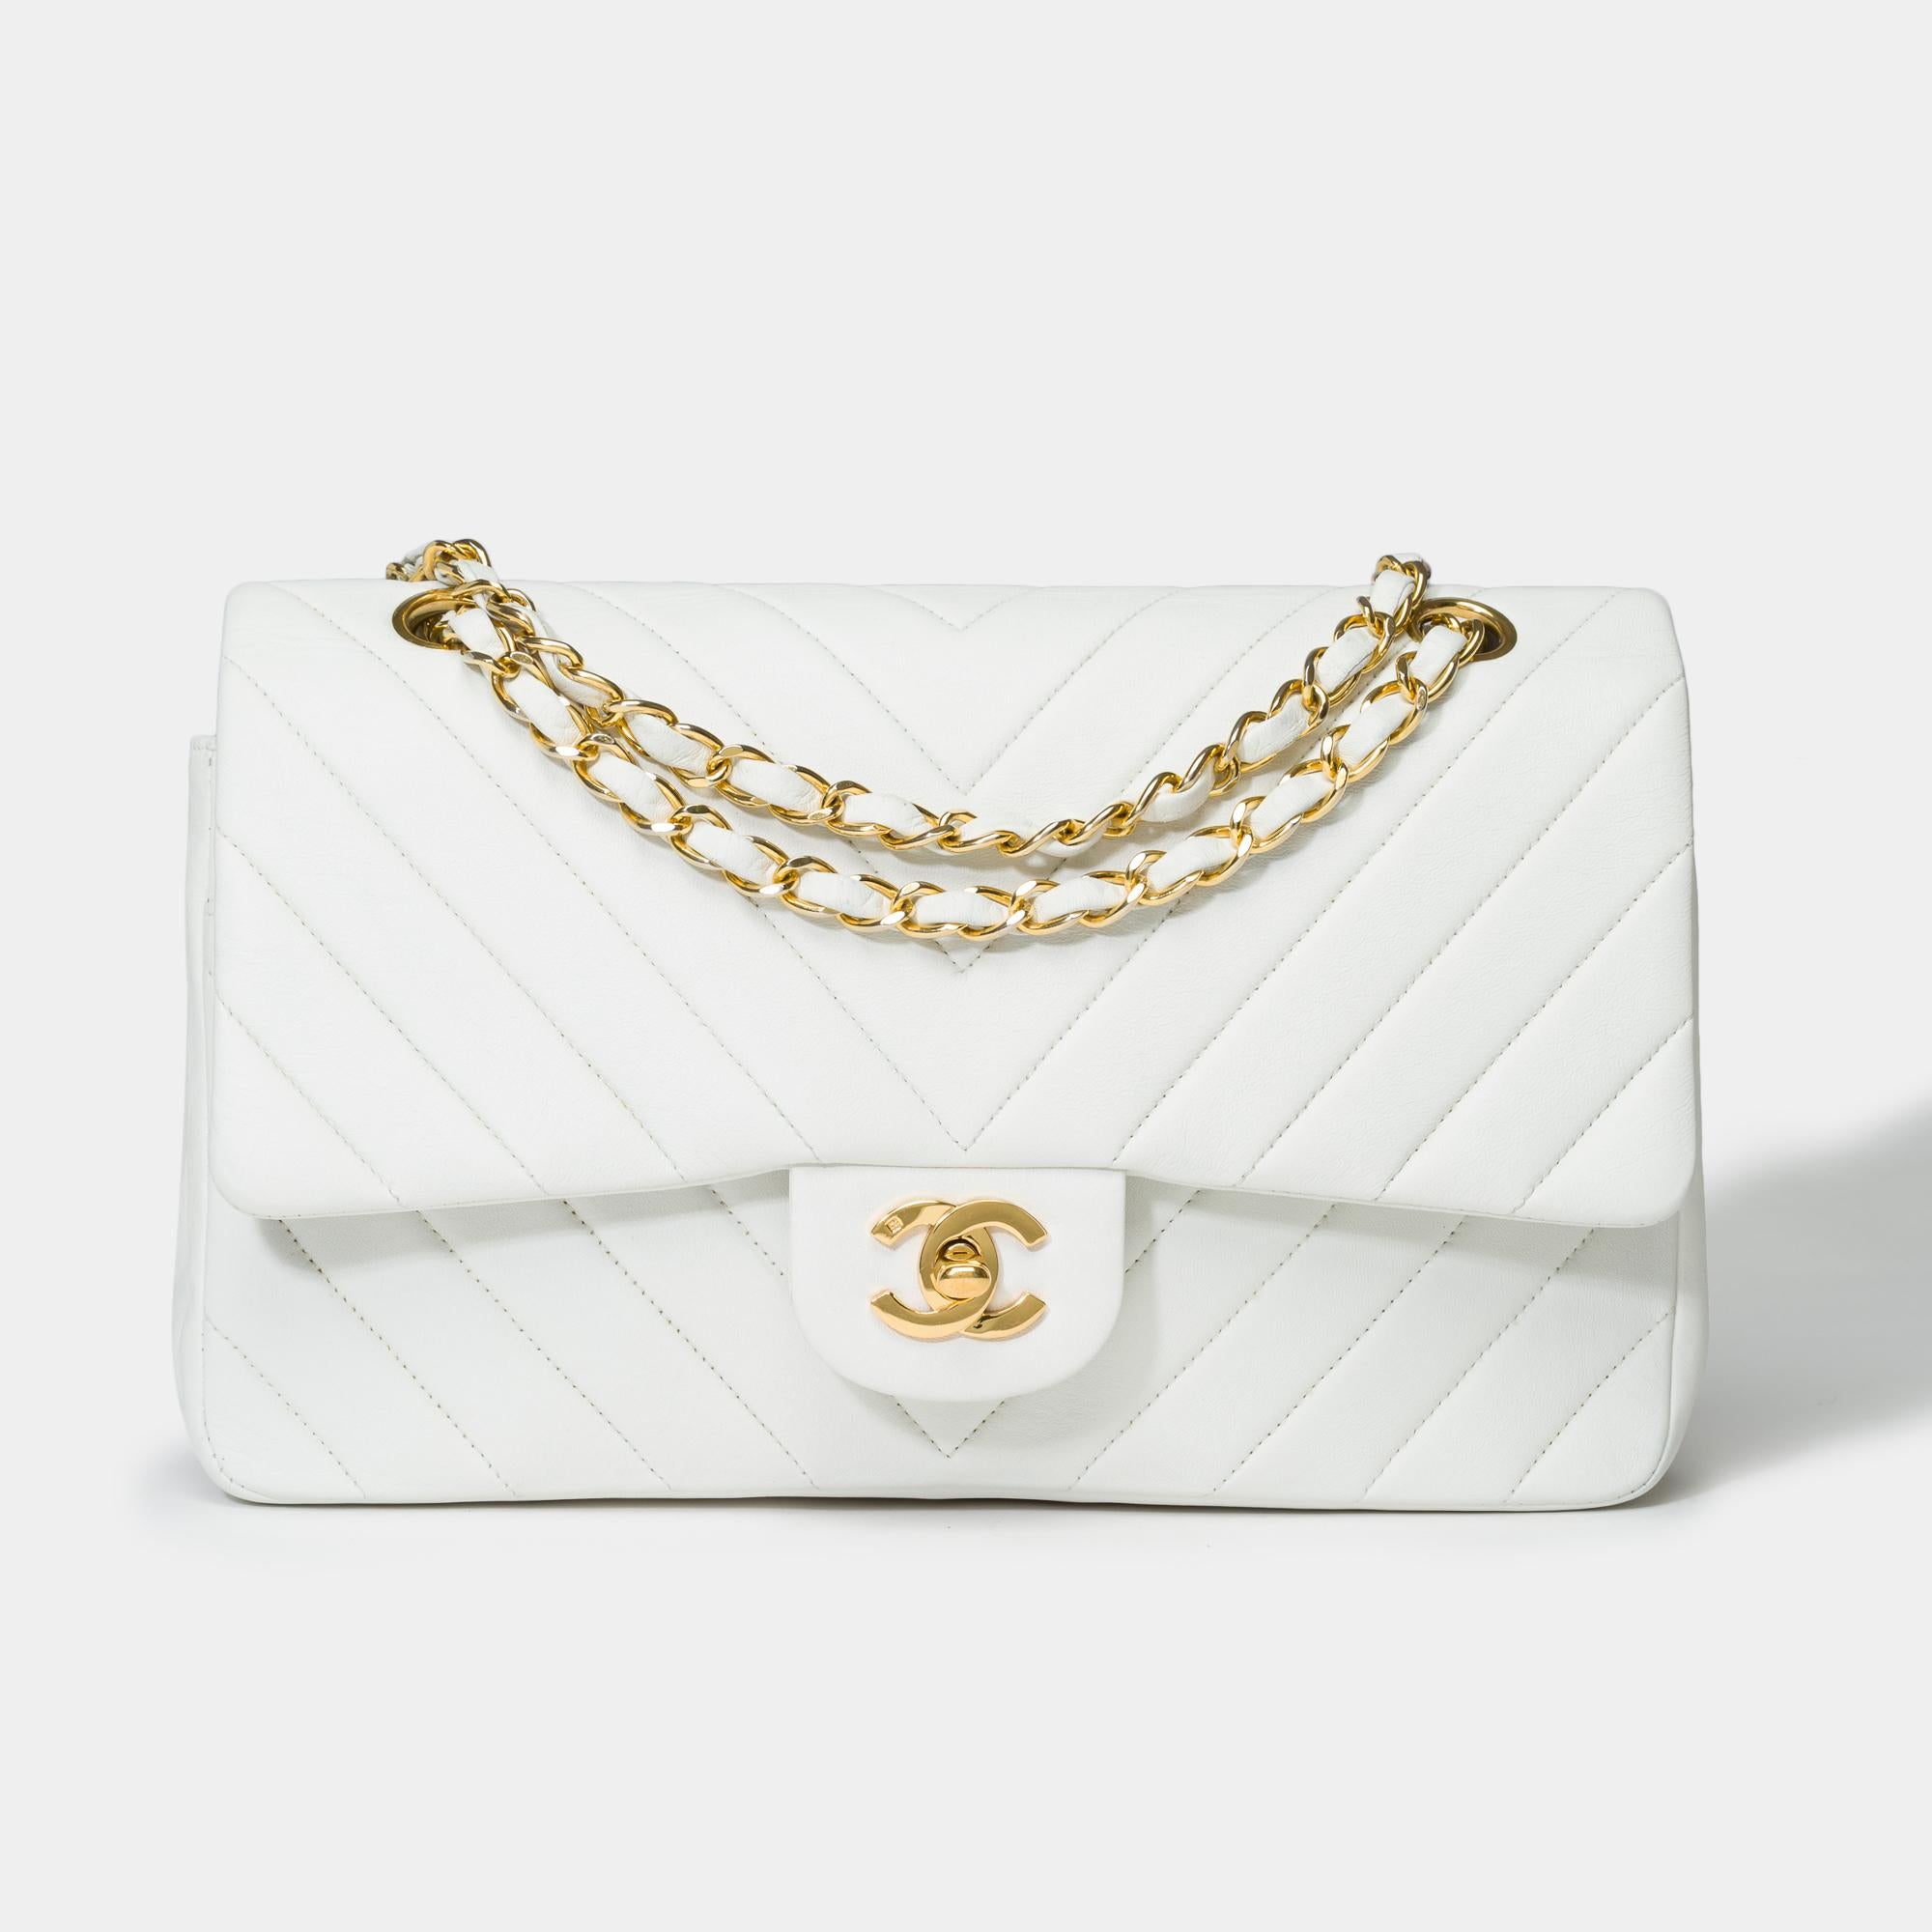 Rare​ ​Chanel​ ​Timeless/Classic​ ​medium​ ​25​ ​cm​ ​double​ ​flap​ ​shoulder​ ​bag​ ​in​ ​white​ ​herringbone​ ​quilted​ ​lambskin​ ​leather,​ ​gold​ ​metal​ ​trim,​ ​a​ ​chain​ ​in​ ​gold​ ​metal​ ​interlaced​ ​with​ ​white​ ​leather​ ​for​ ​a​